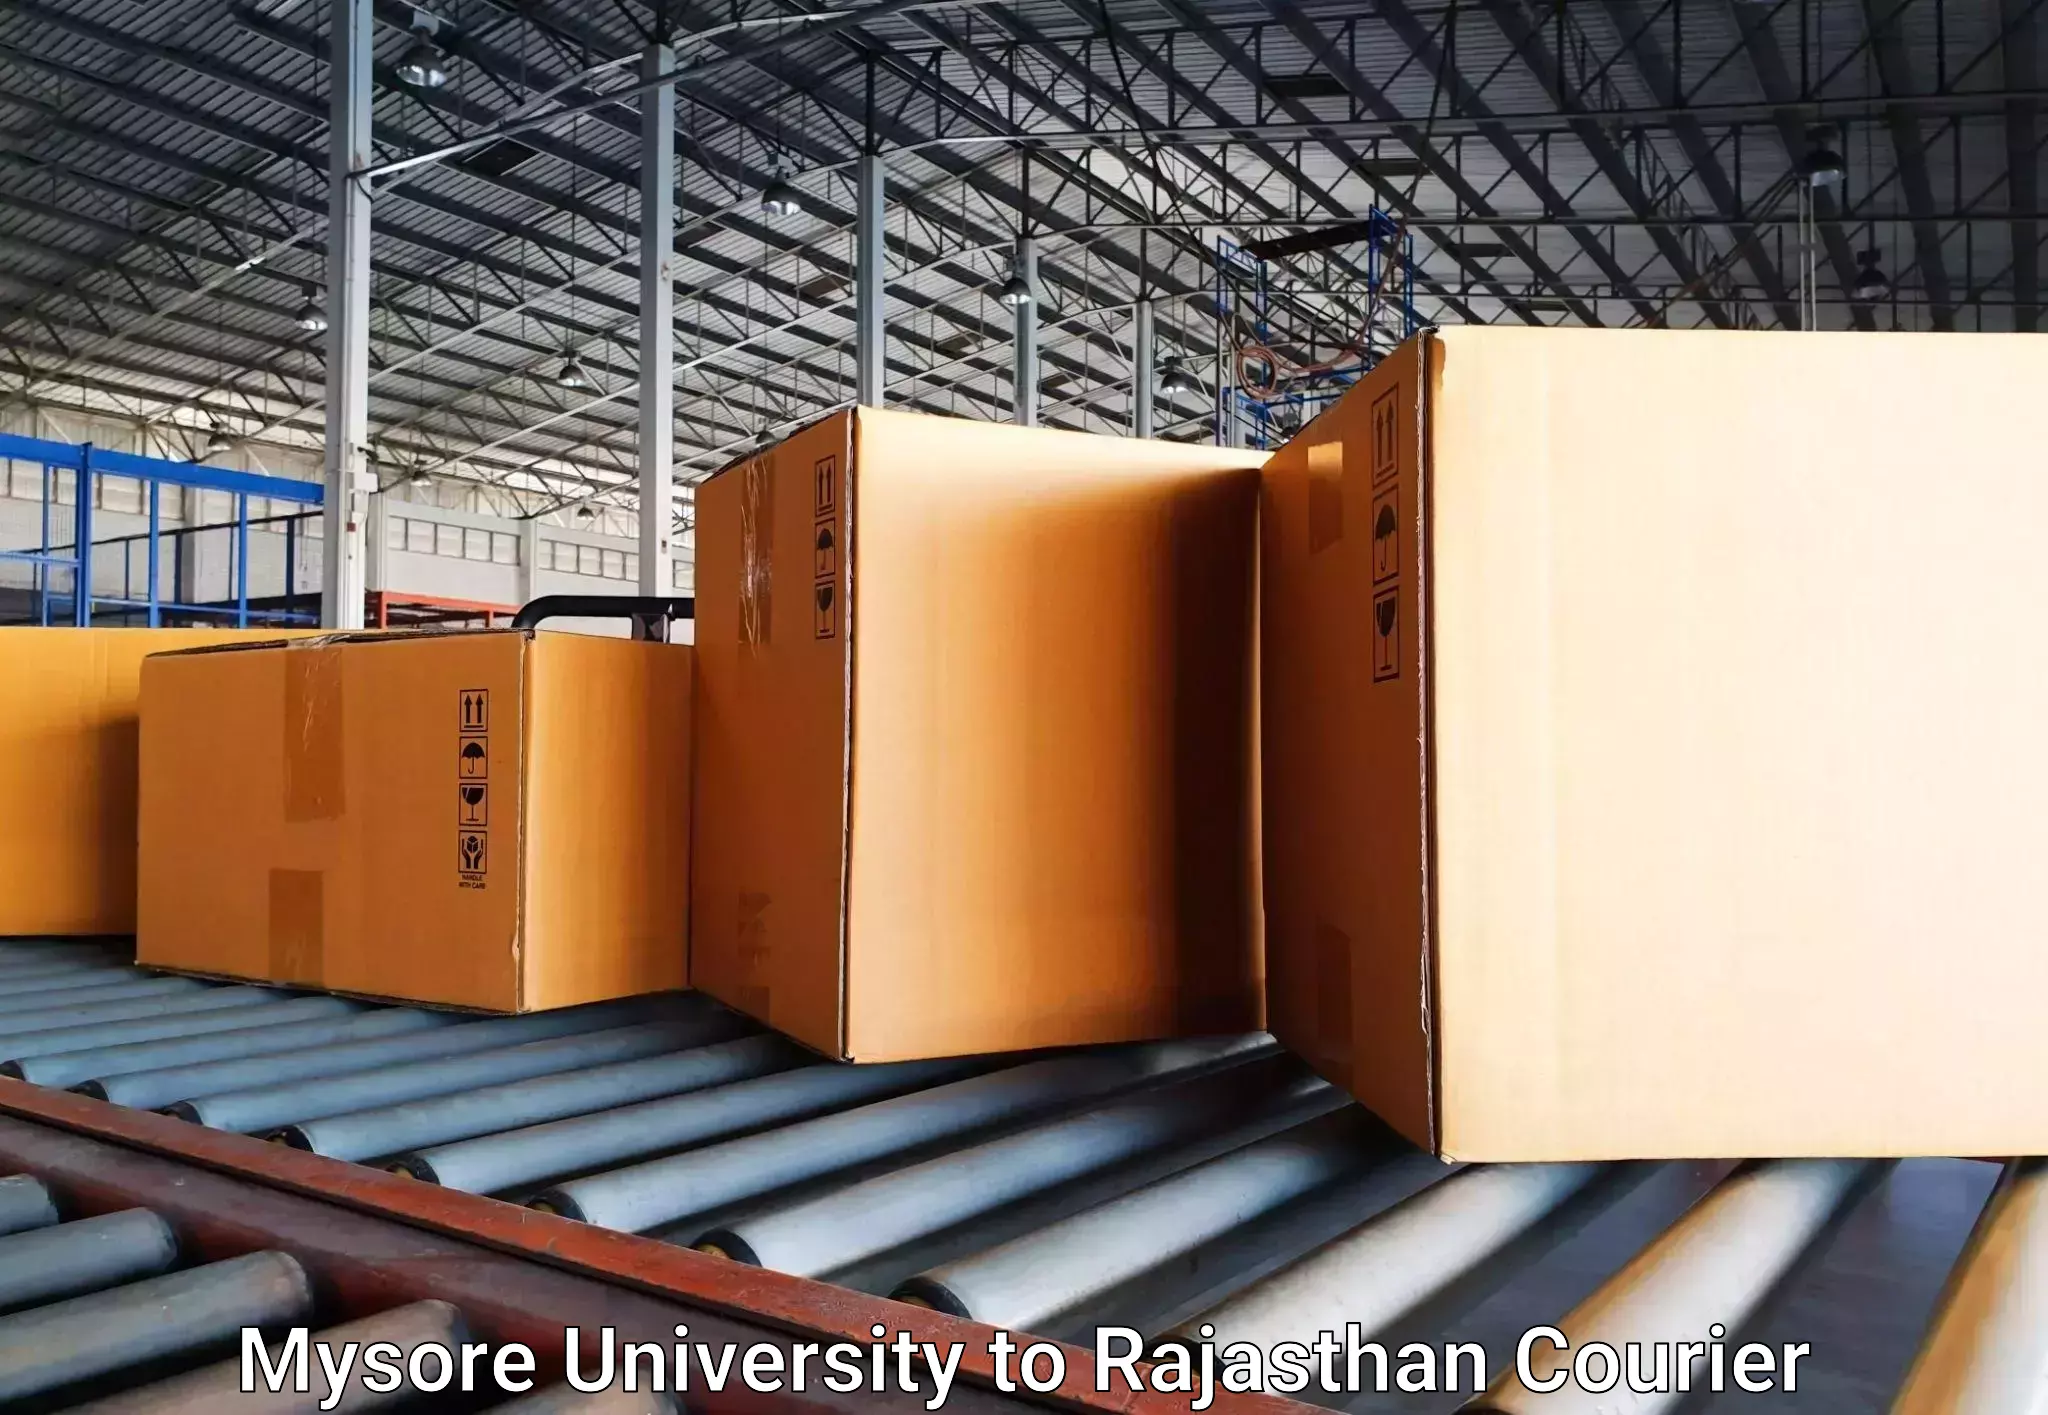 Luggage delivery system Mysore University to Abu Road